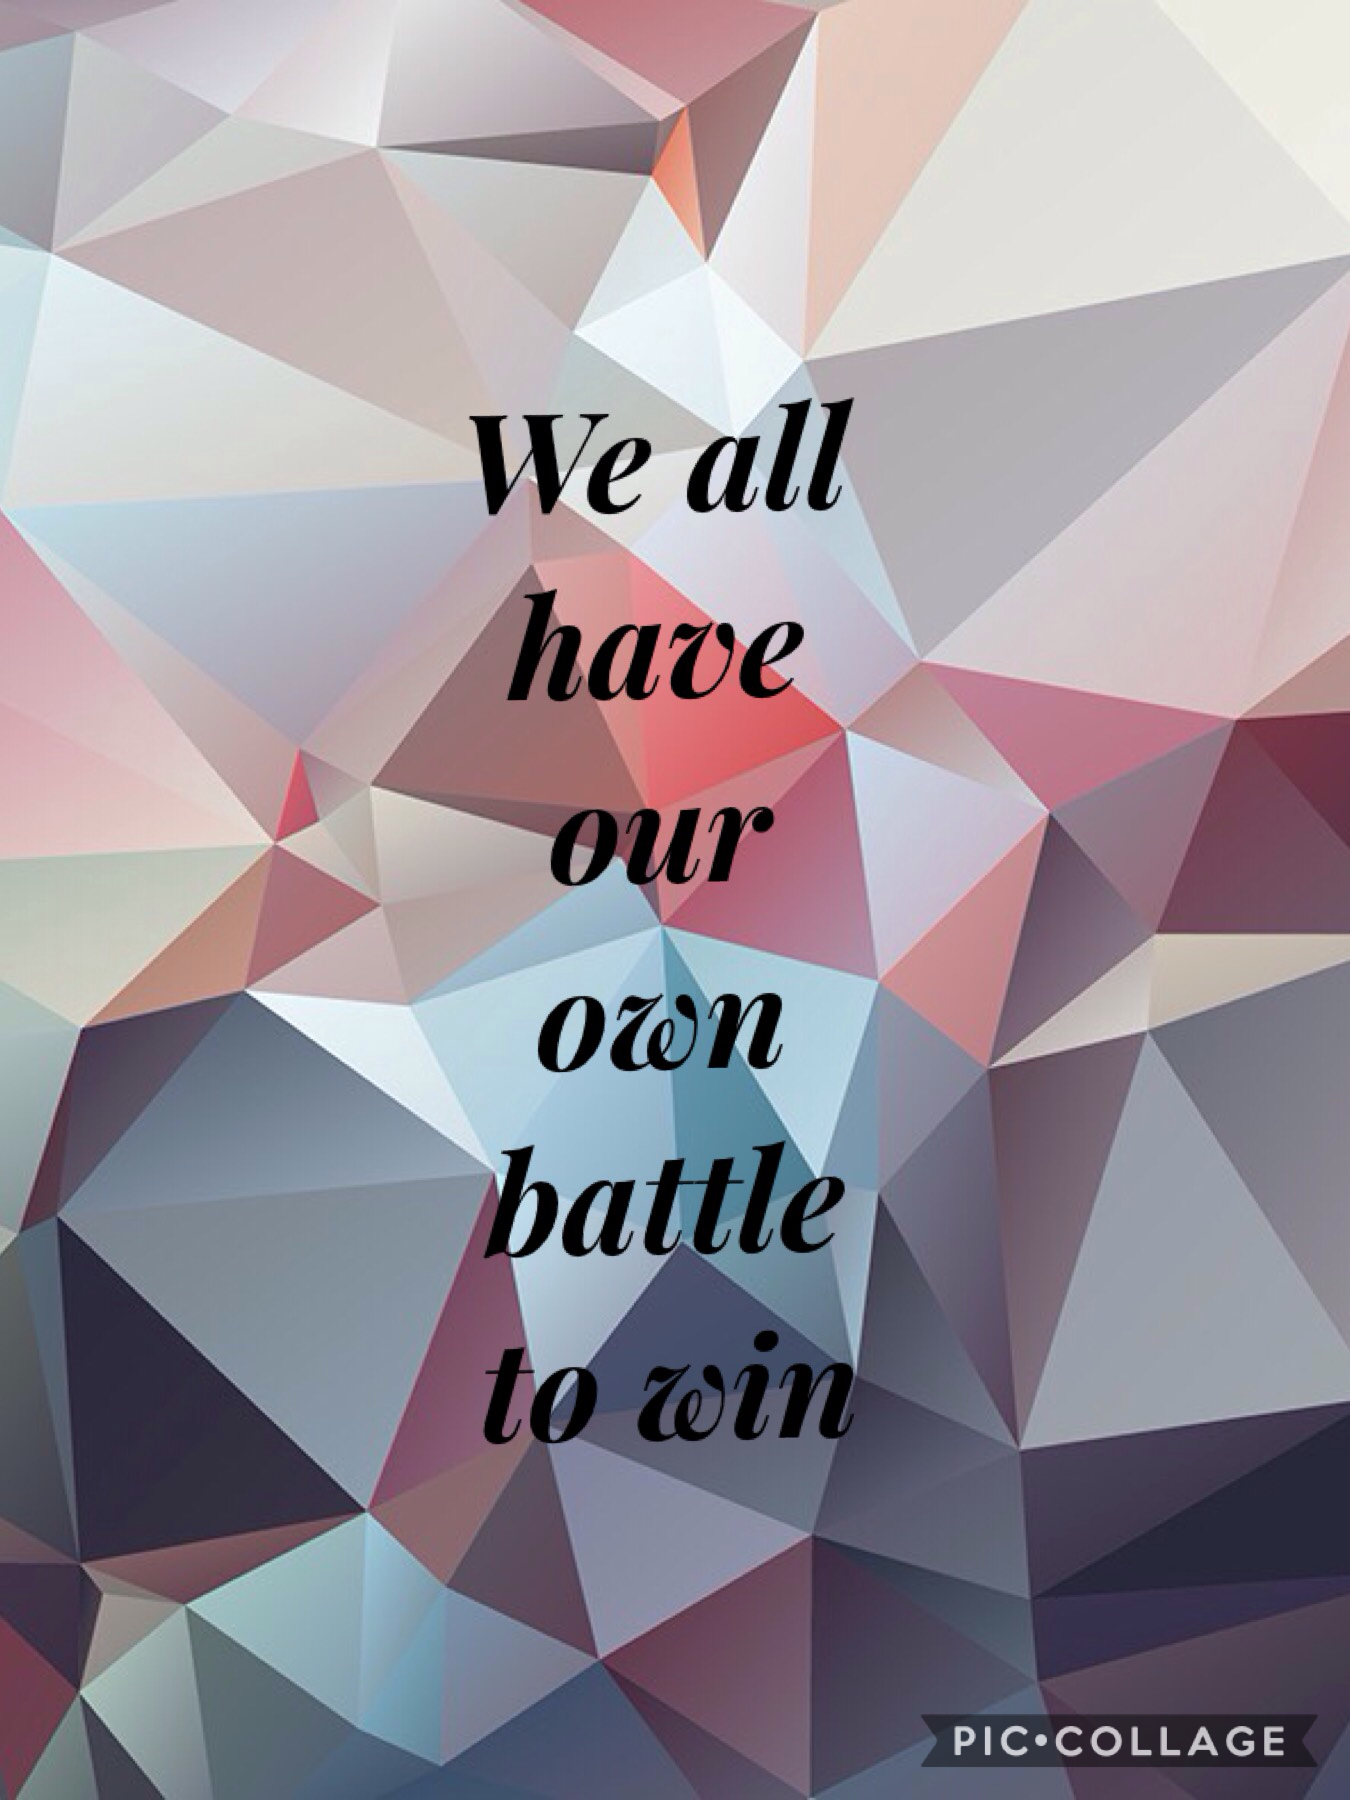 Quotes " We all have our own battle to win "